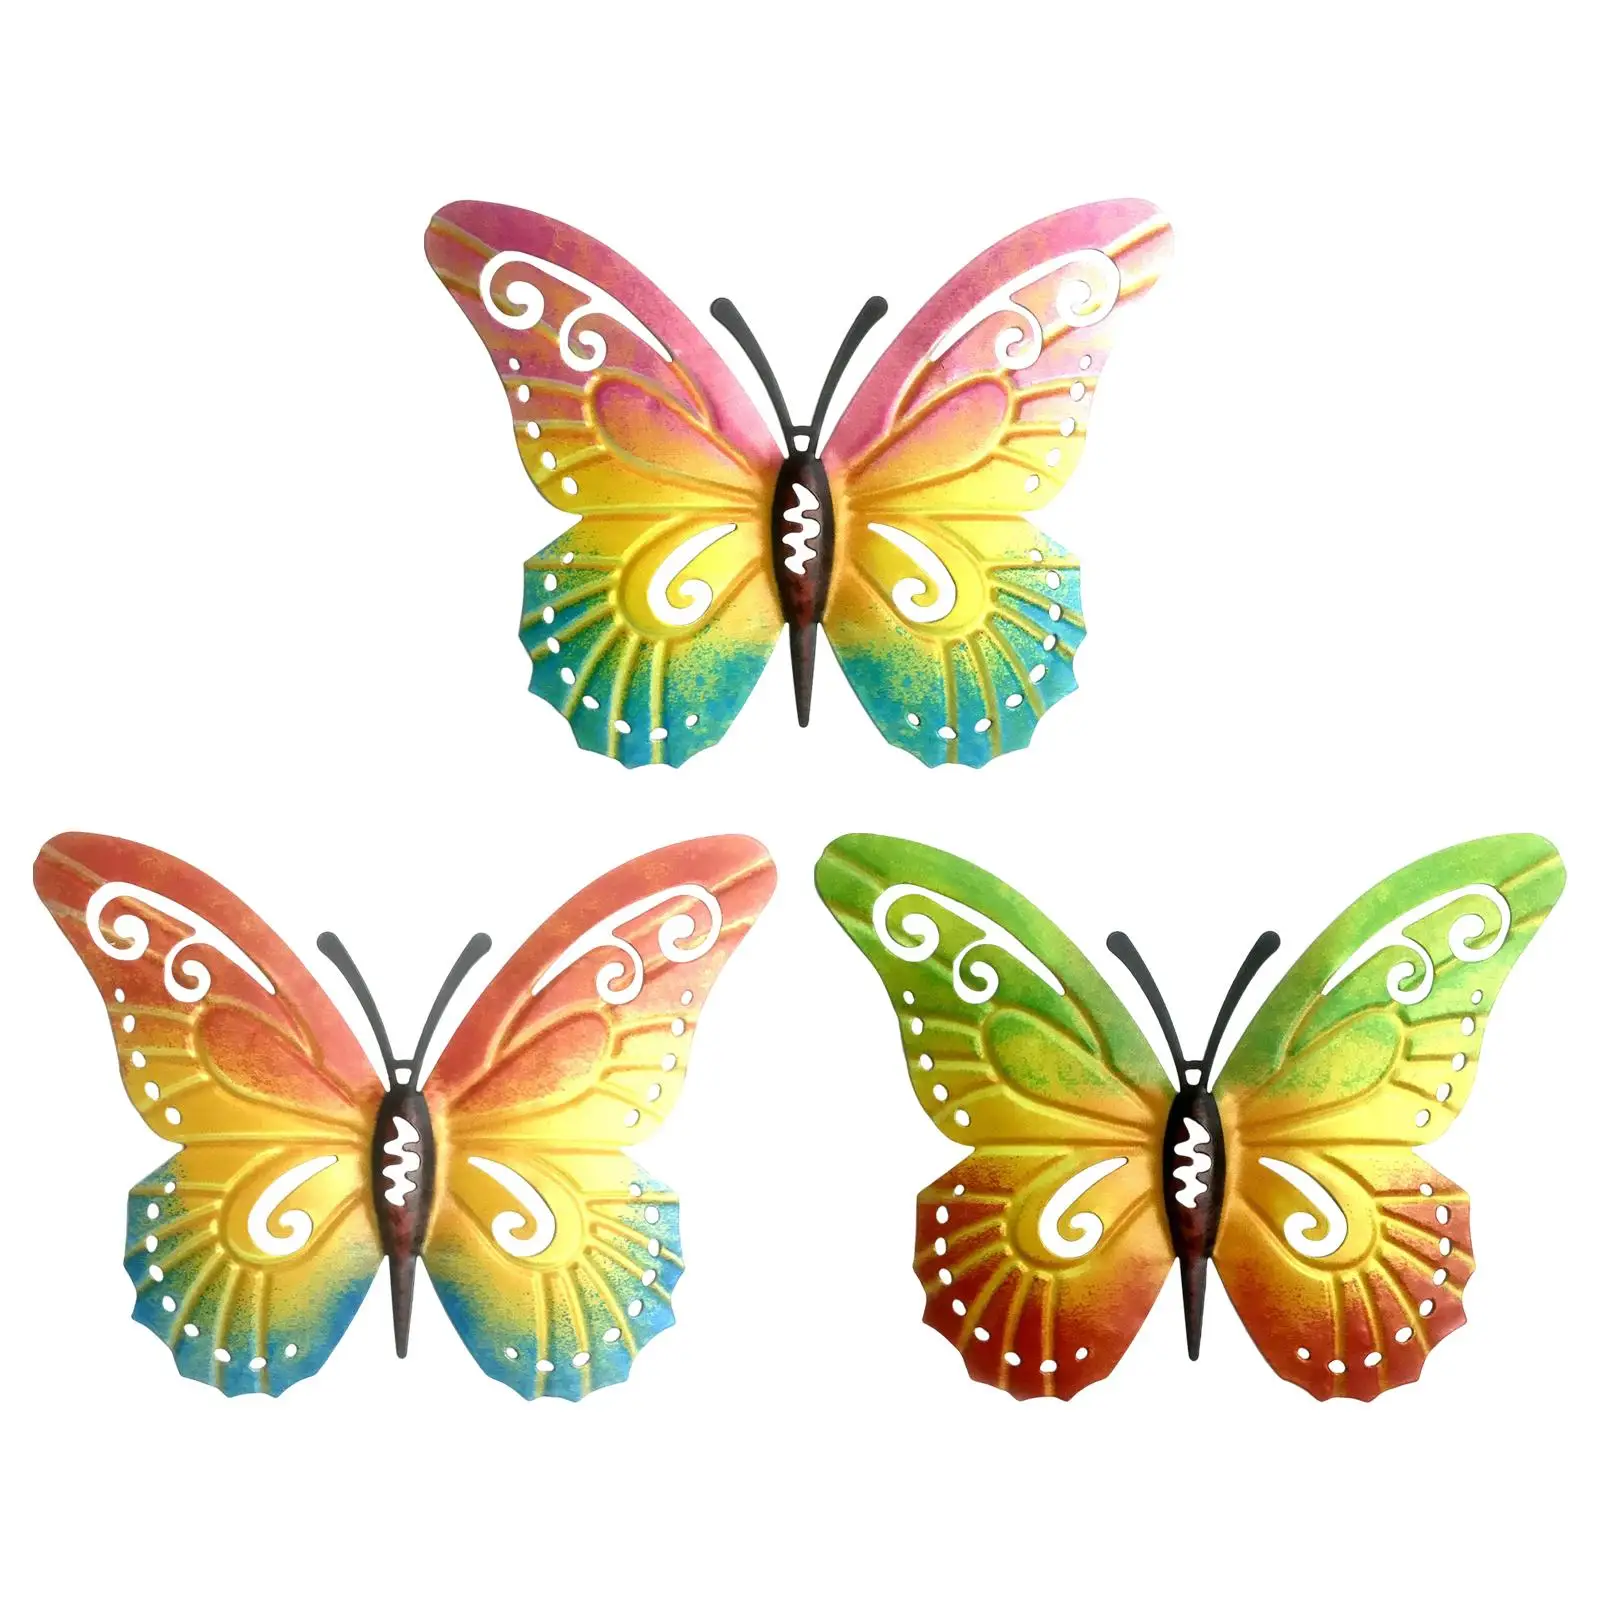 Butterfly Wall Decors Hanging Sculptures Figurines Display Artwork Decoration